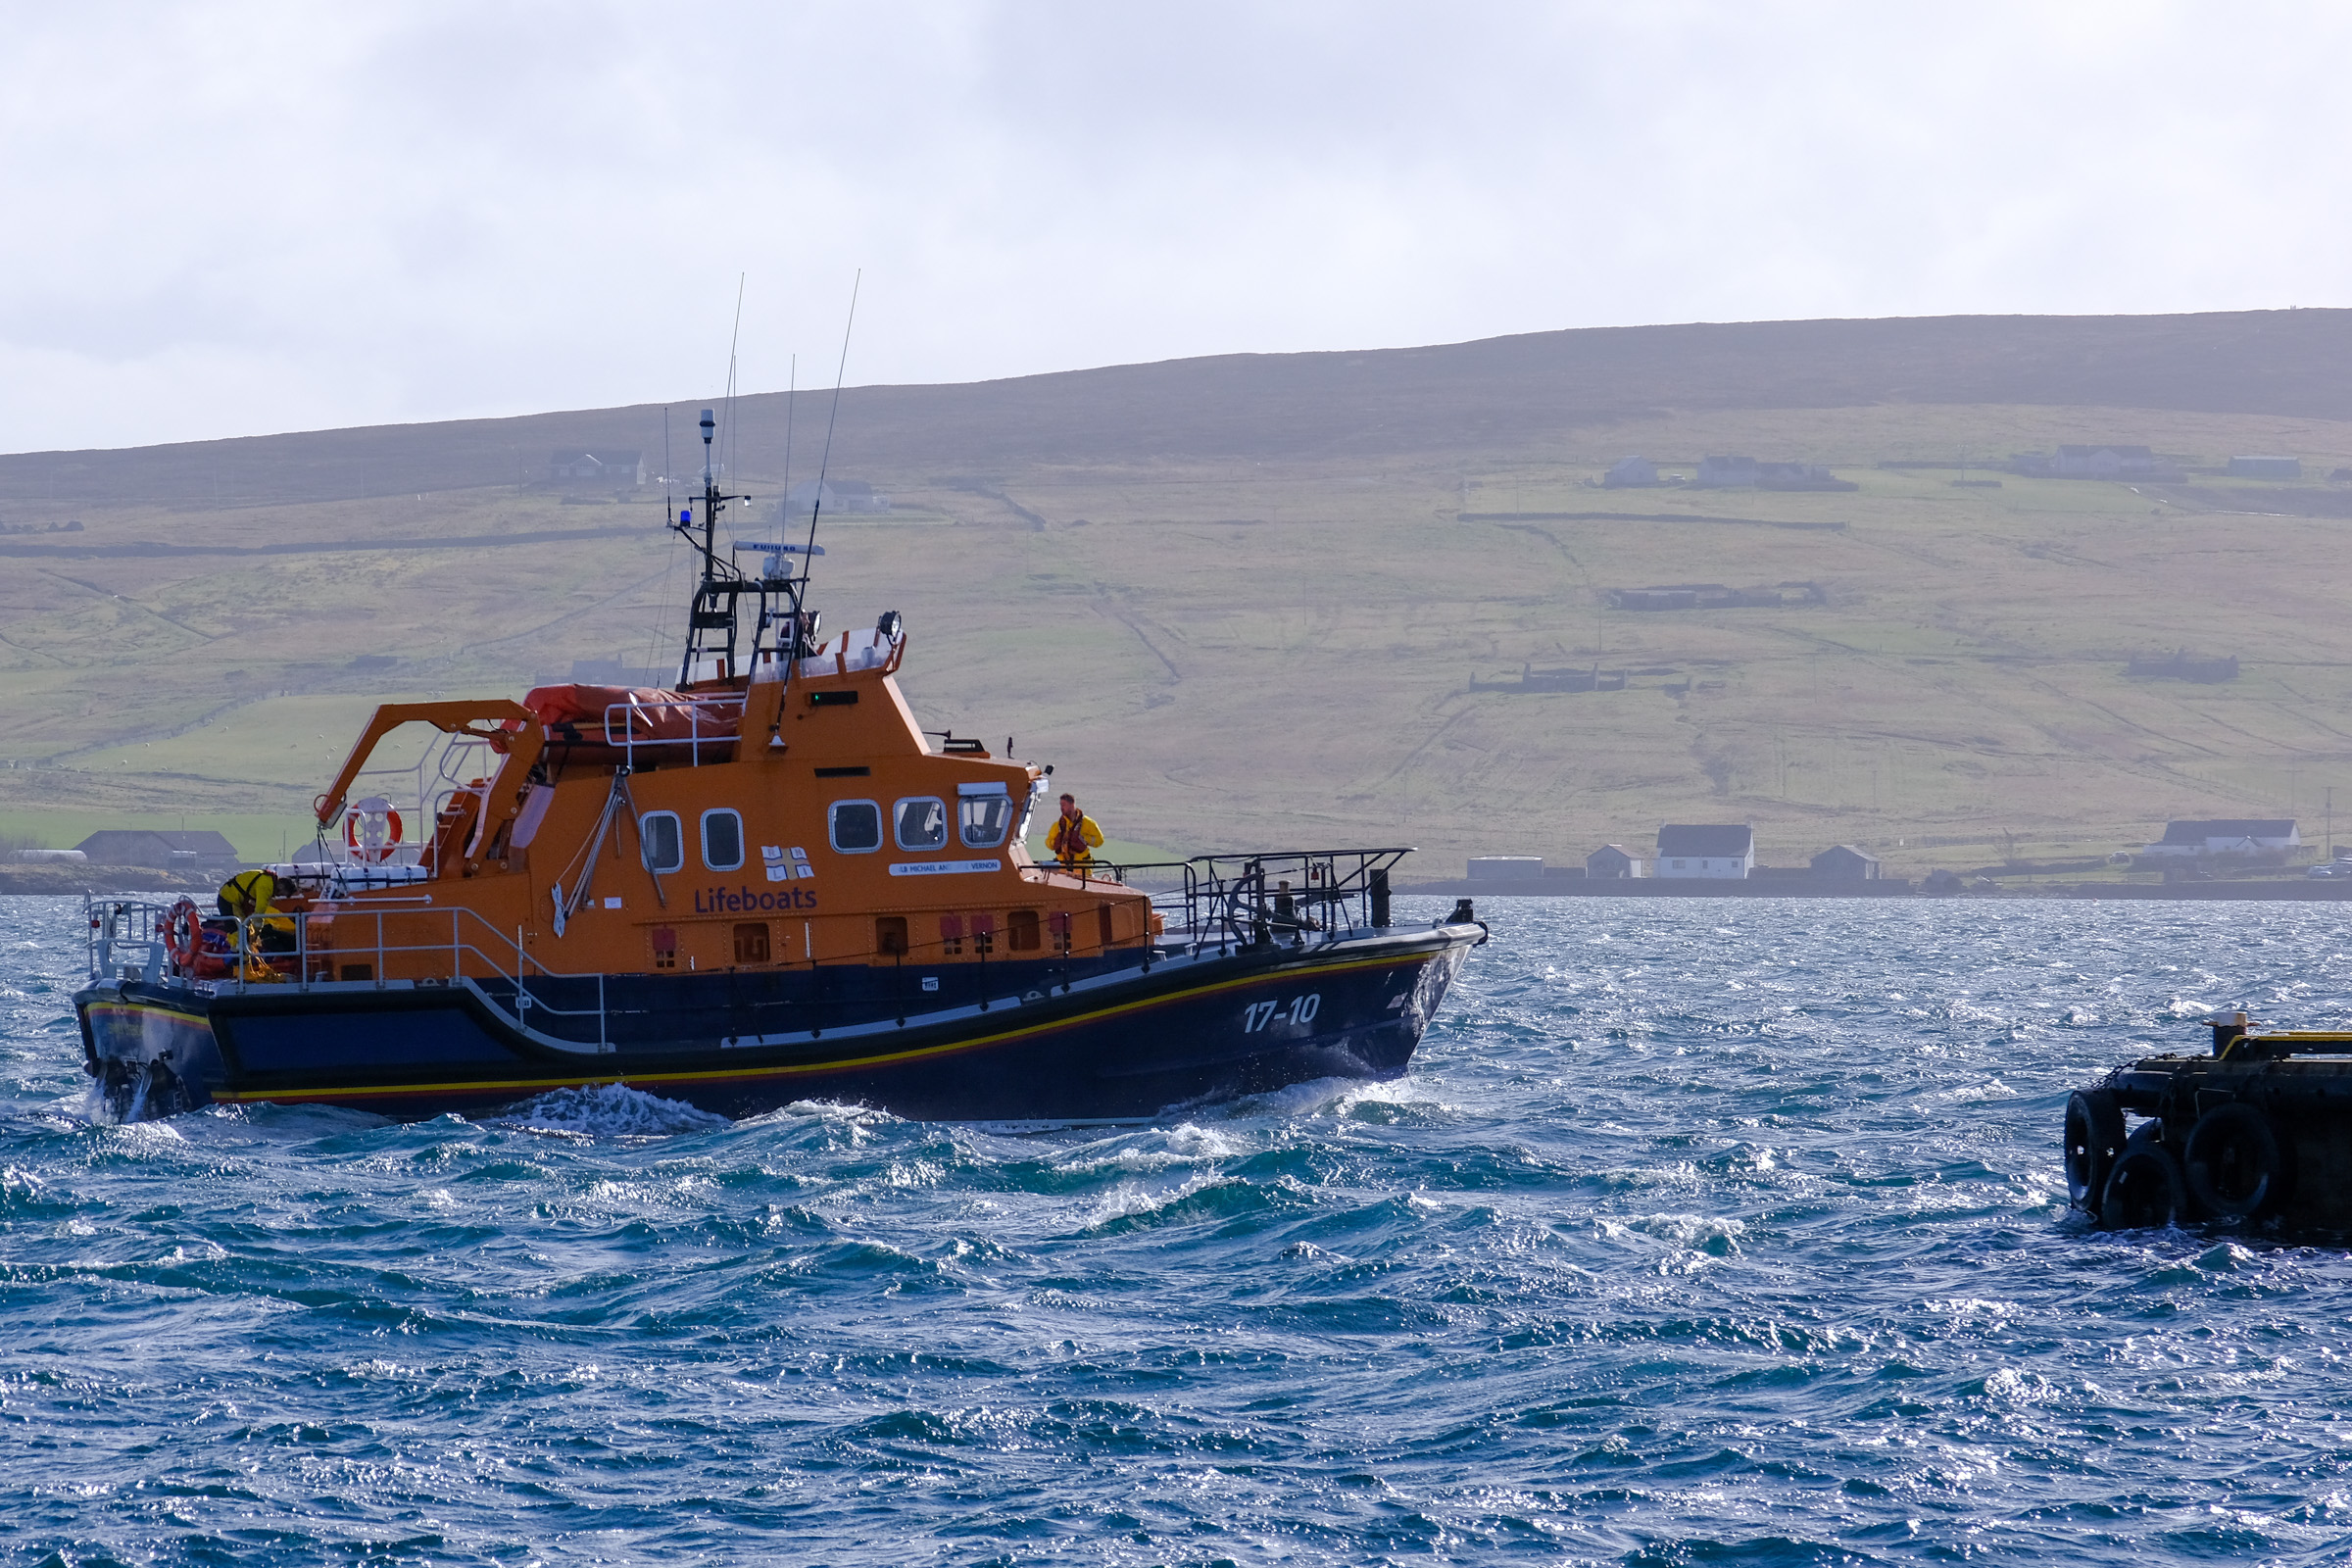 Lerwick lifeboat crew recovered floating debris from the scene of the sinking, including a liferaft and a 'hi-line' rope used for helicopter lifting operations